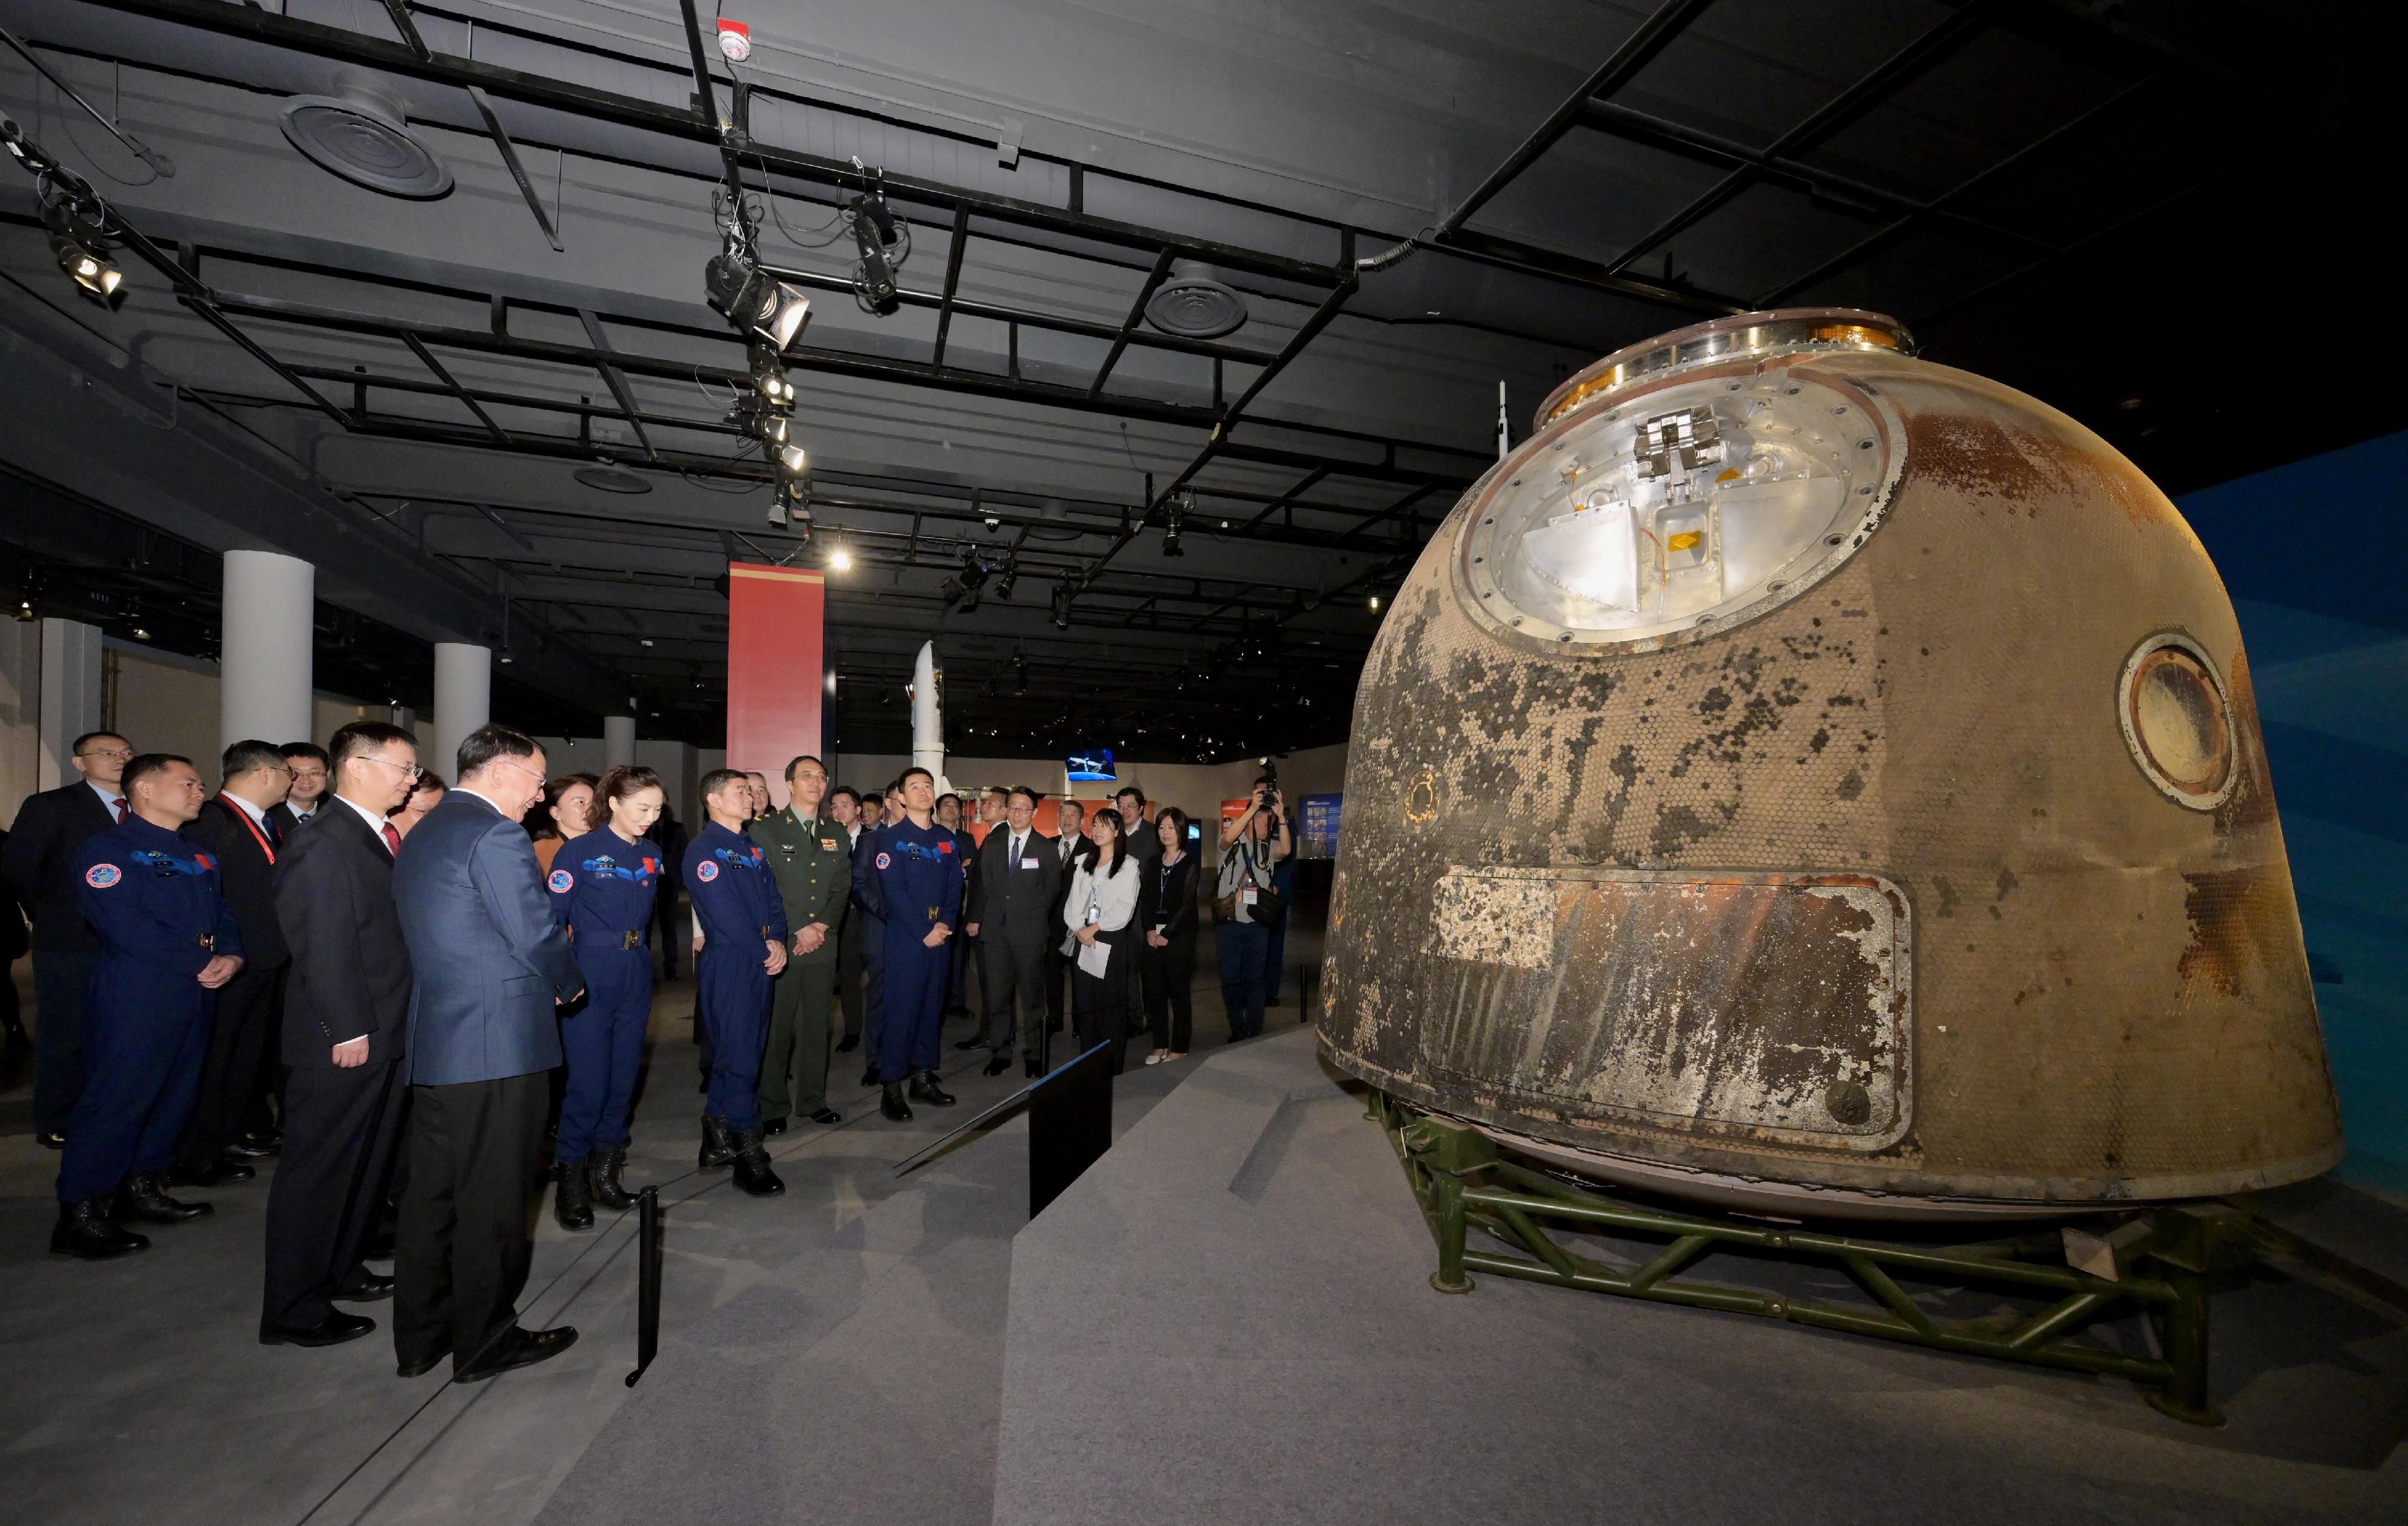 The China Manned Space delegation continued their visit to Hong Kong today (November 30). Photo shows the leader of the delegation and Deputy Director General of the China Manned Space Agency, Mr Lin Xiqiang (fourth left), and other delegation members, accompanied by the Chief Secretary for Administration, Mr Chan Kwok-ki (fifth left), touring the China Manned Space Exhibition. 

